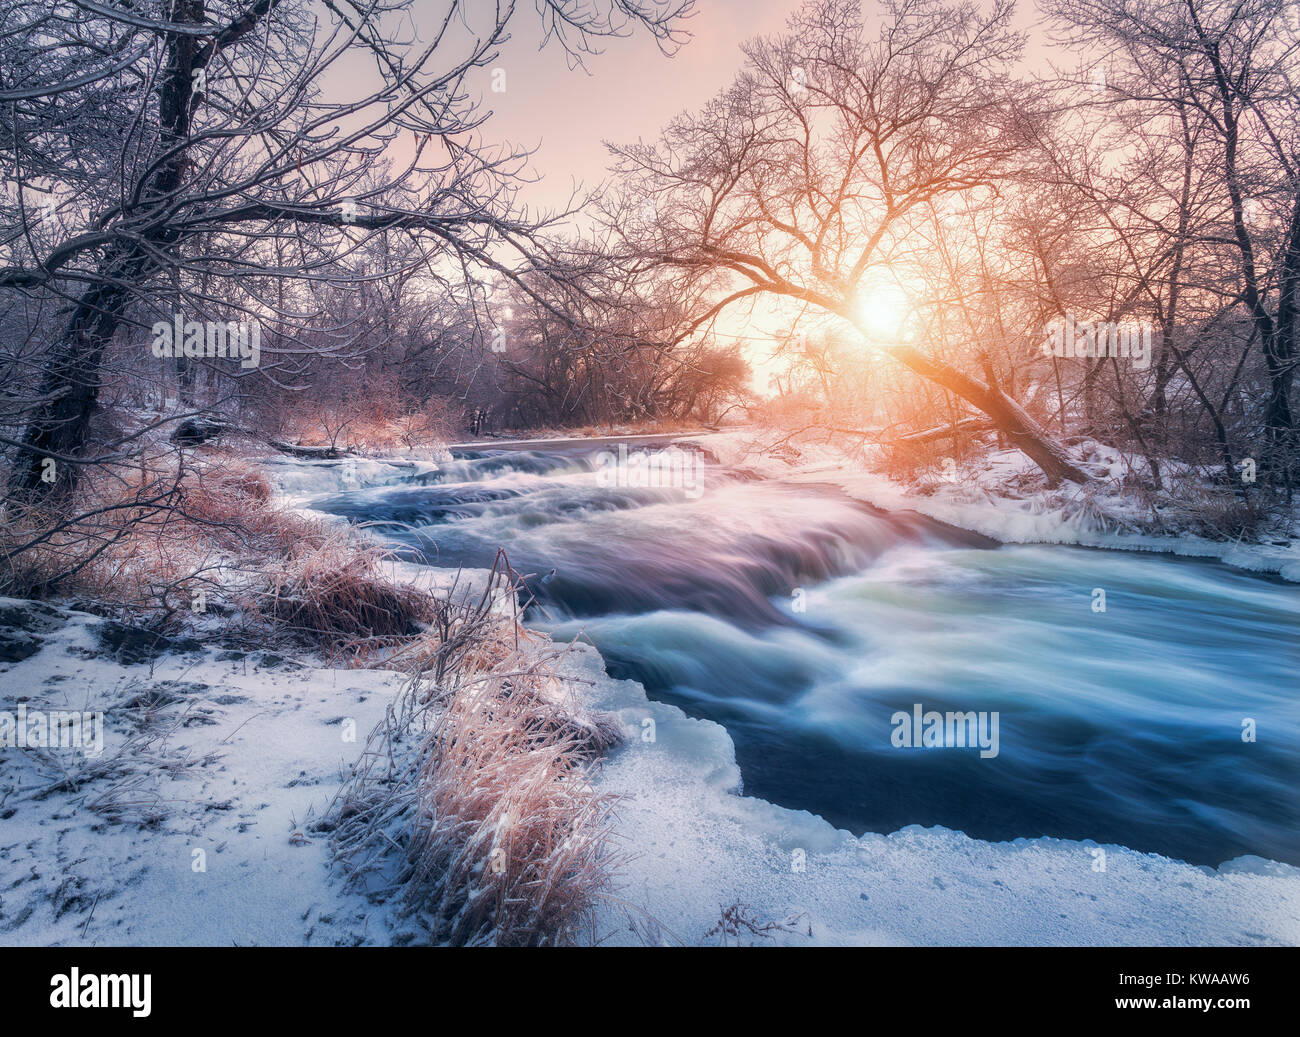 Winter forest with amazing river at sunset. Winter landscape with snowy trees, ice, beautiful frozen river, snowy bushes, colorful sky in dusk. Blurre Stock Photo